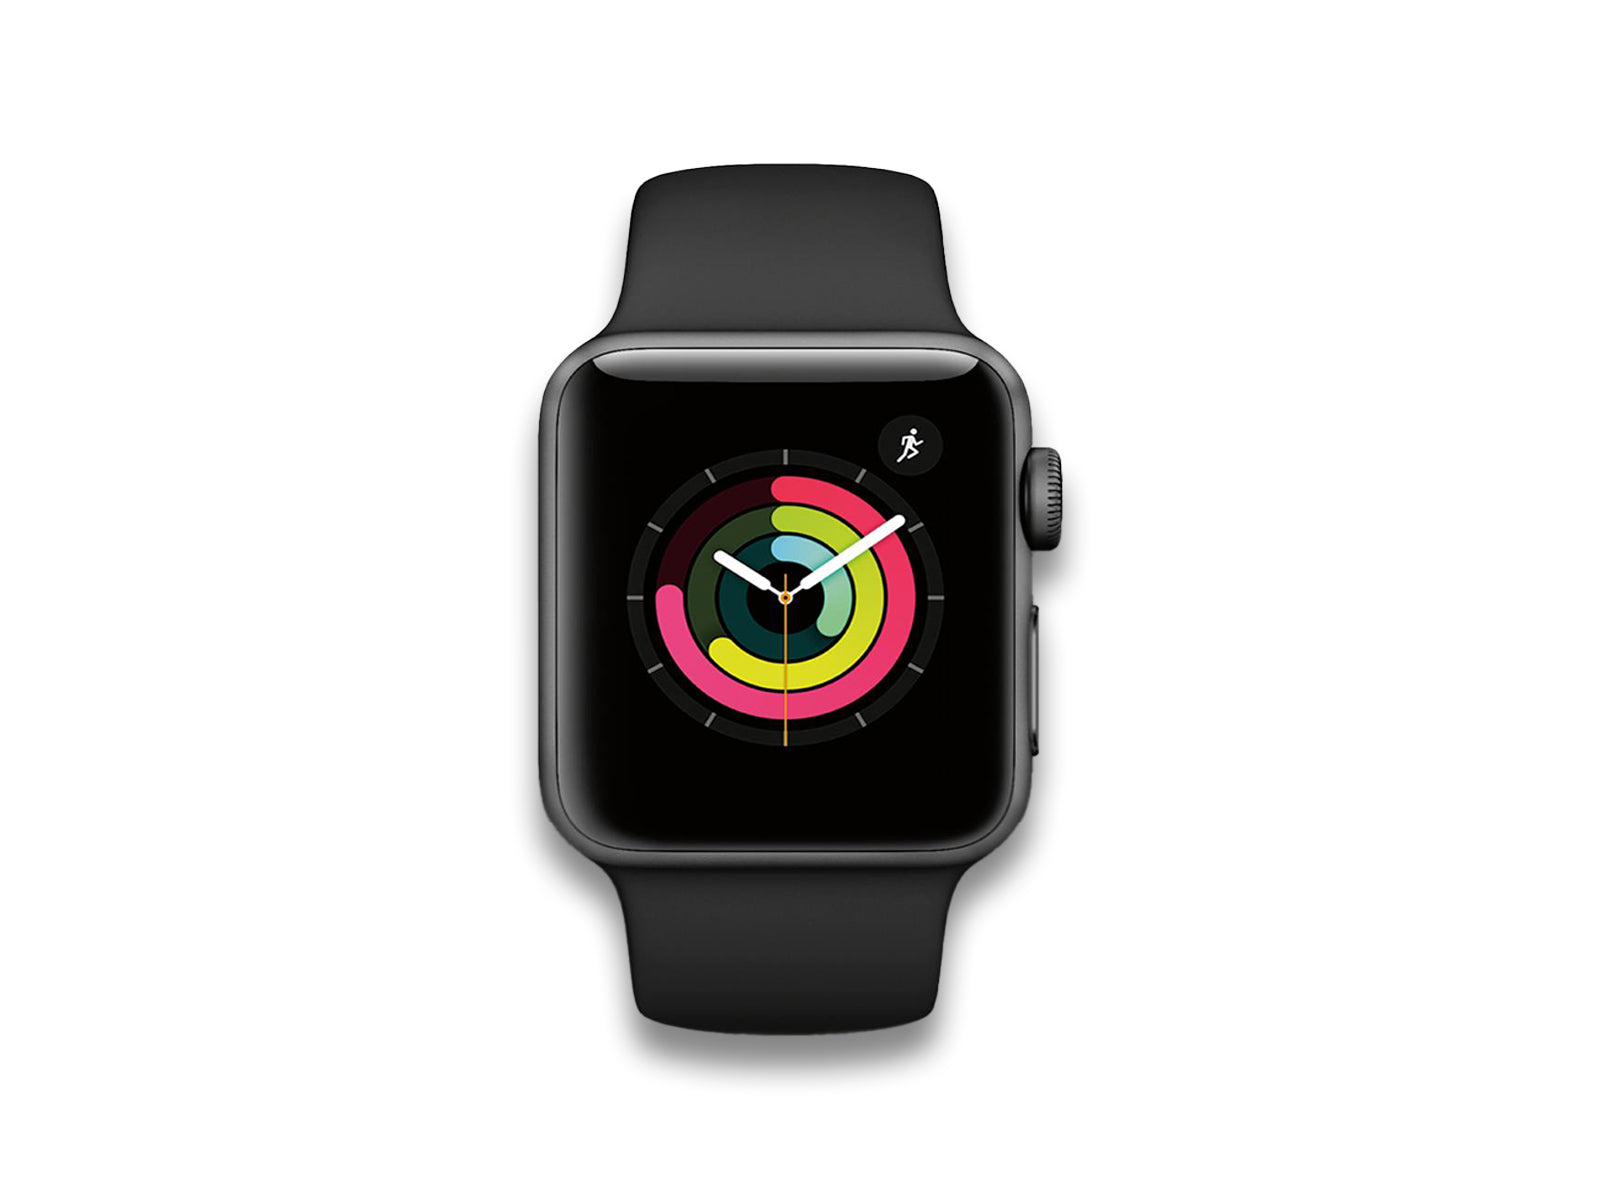 Apple Watch Series 3 in Black Showing Fitness